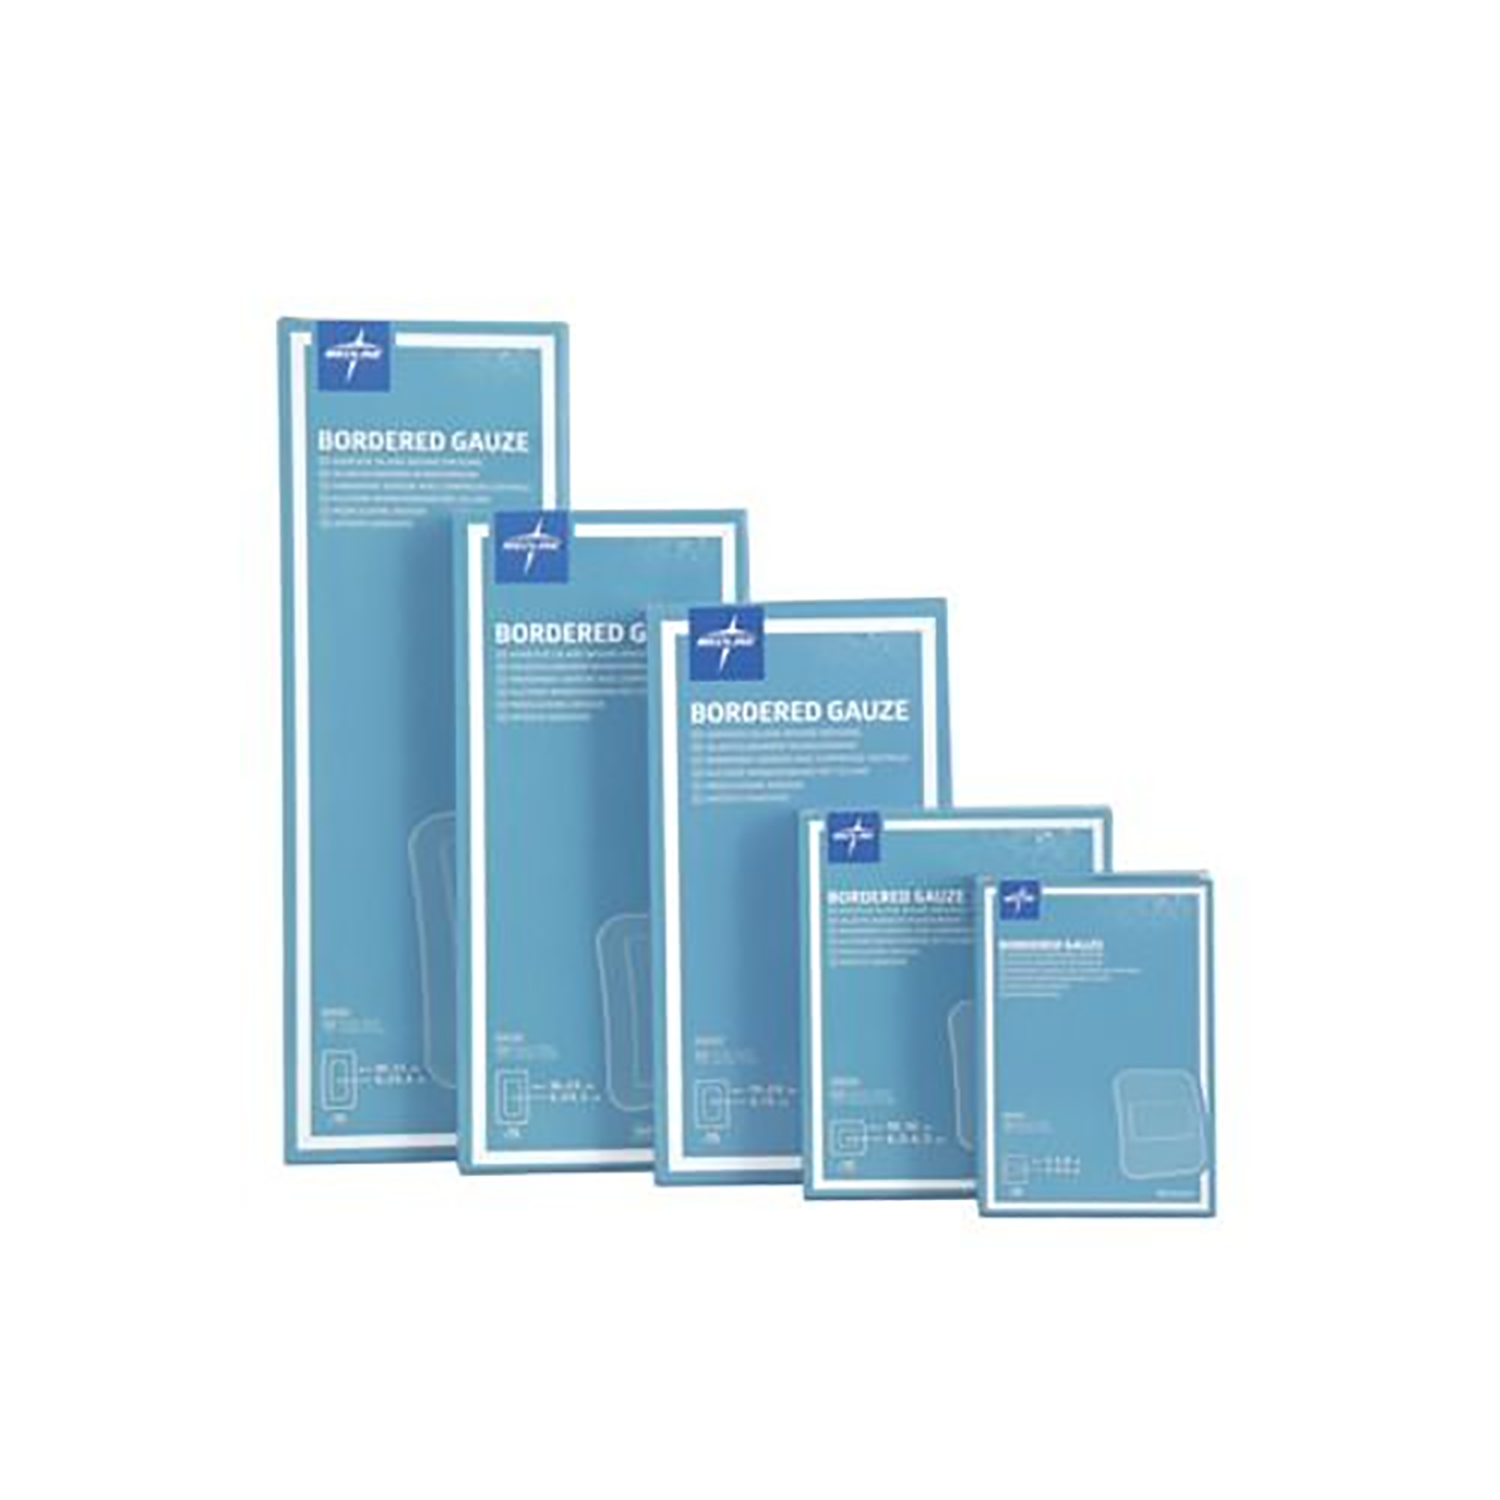 Medline Bordered Gauze Dressing with Pad | 10 x 35cm | Pack of 15 | Short Expiry Date